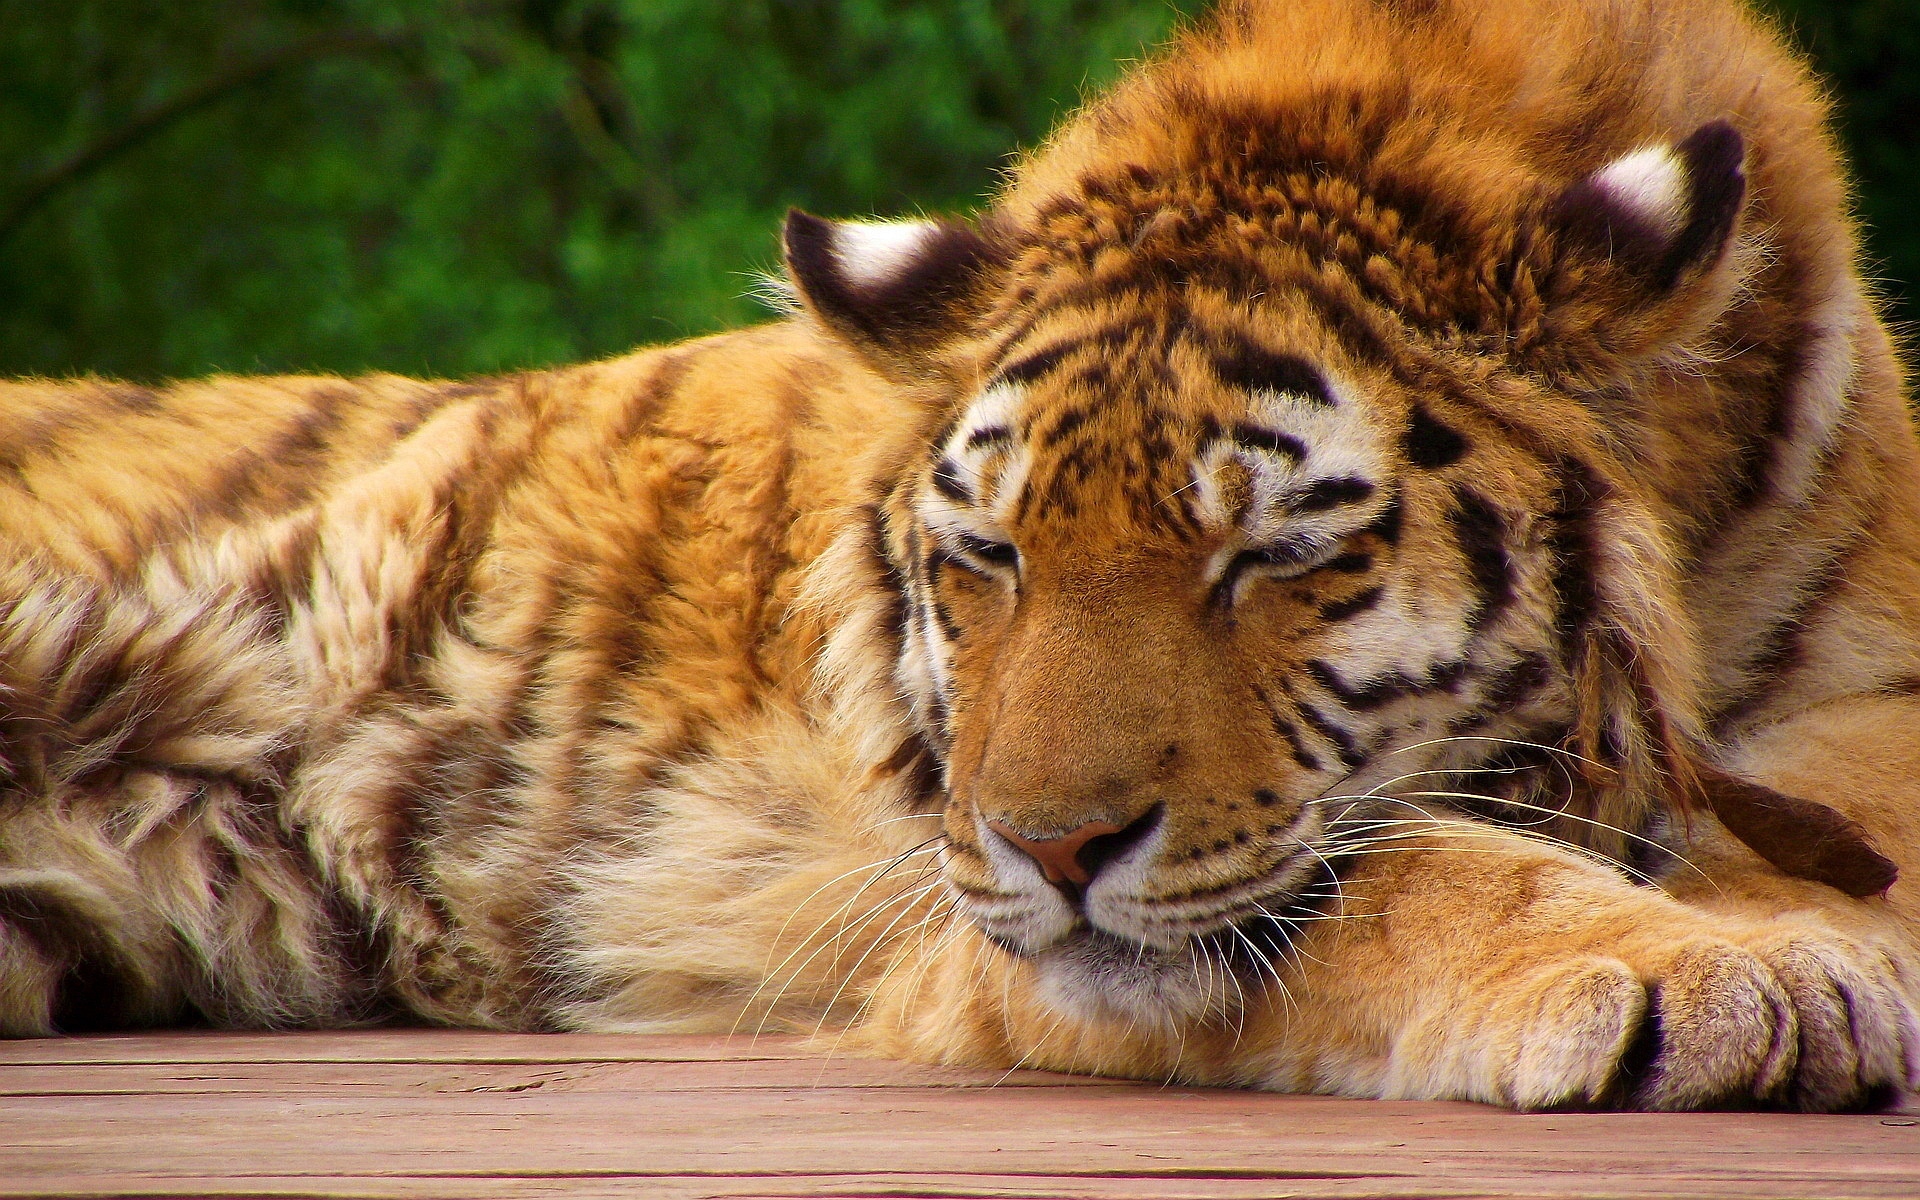 Sleeping Tiger Pictures